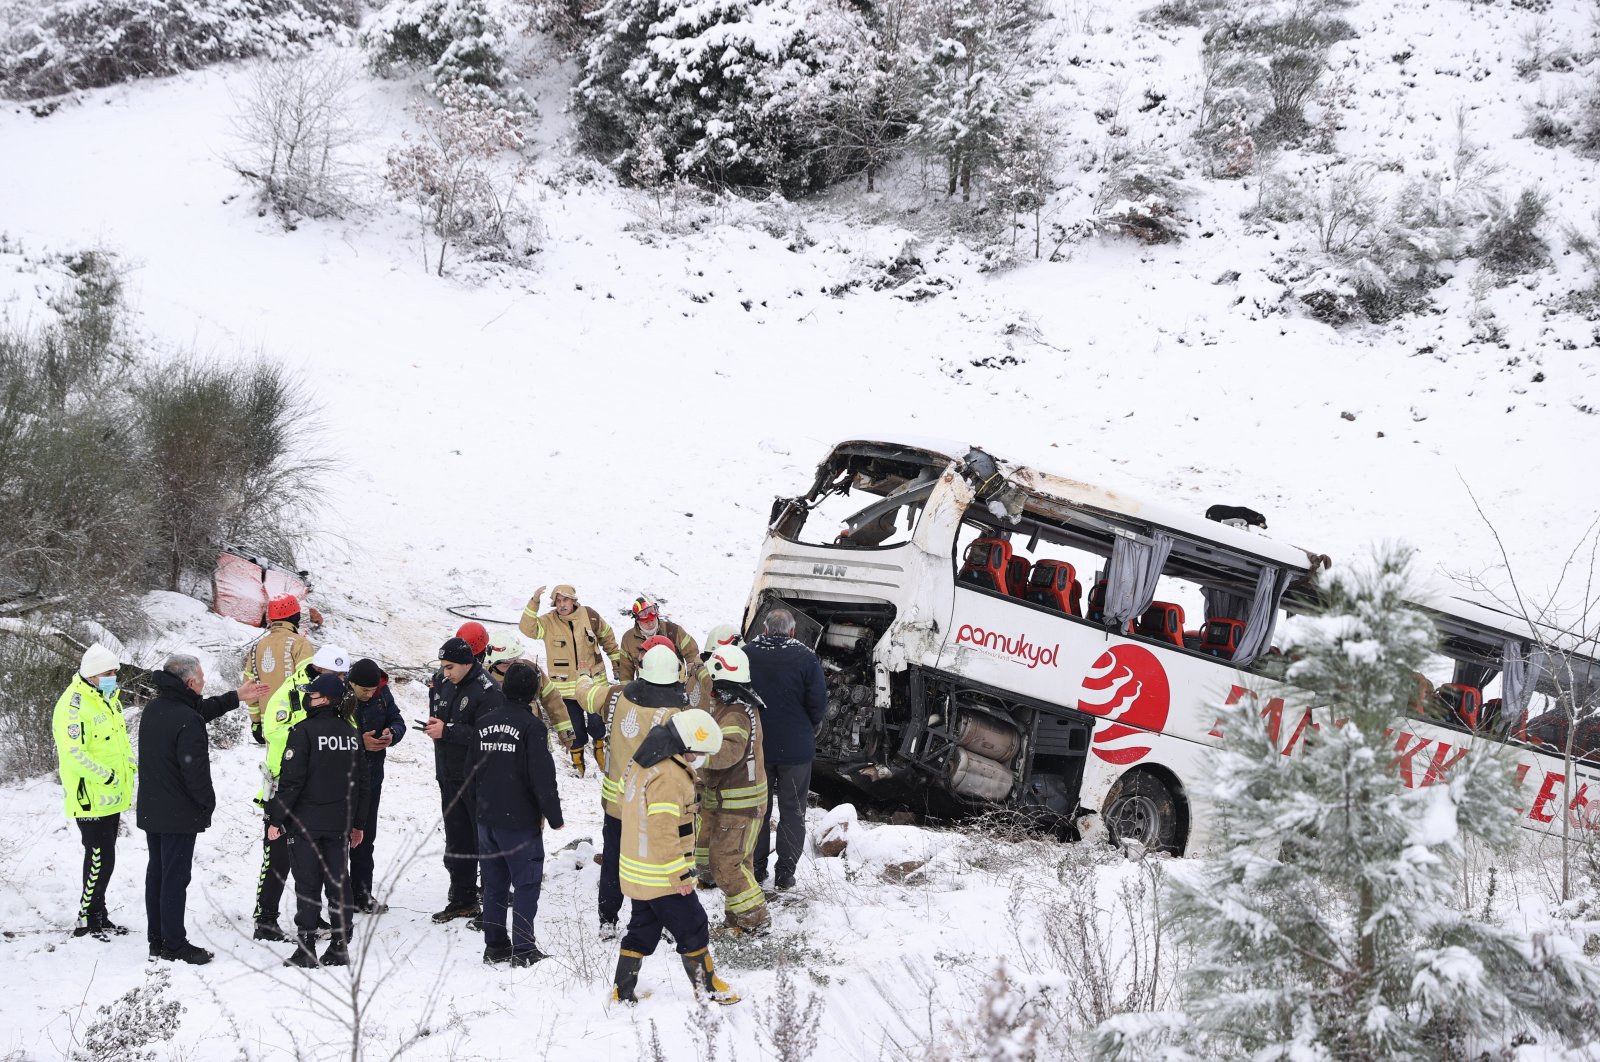 Health crews and security forces are seen near the scene of an accident in Istanbul, Turkey, Jan. 23, 2022. (IHA Photo)